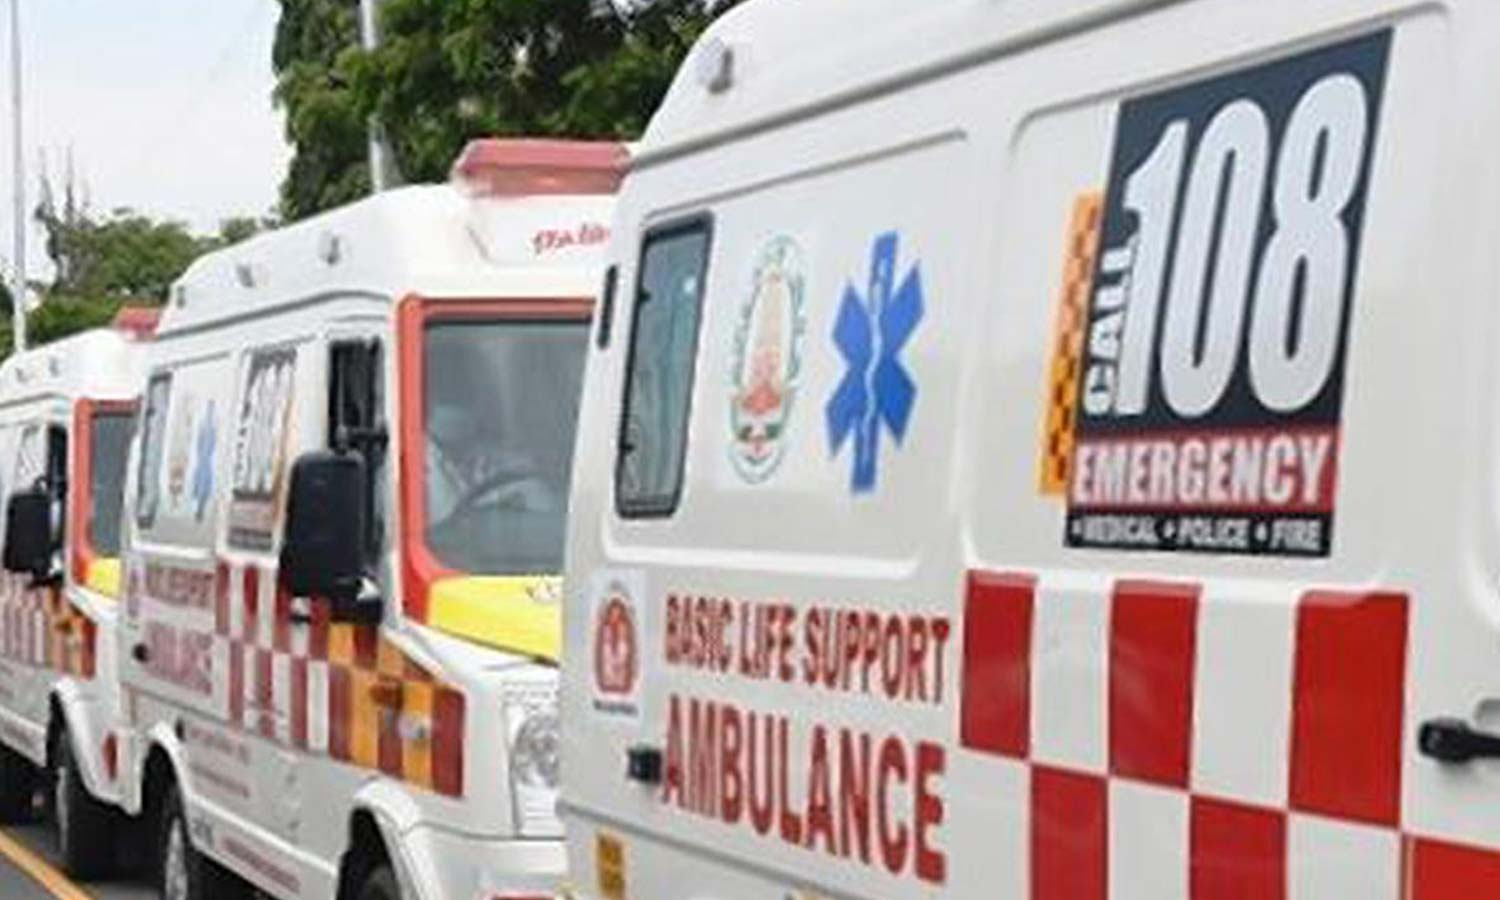 10000 Rs fine for not giving way to ambulance says TN government